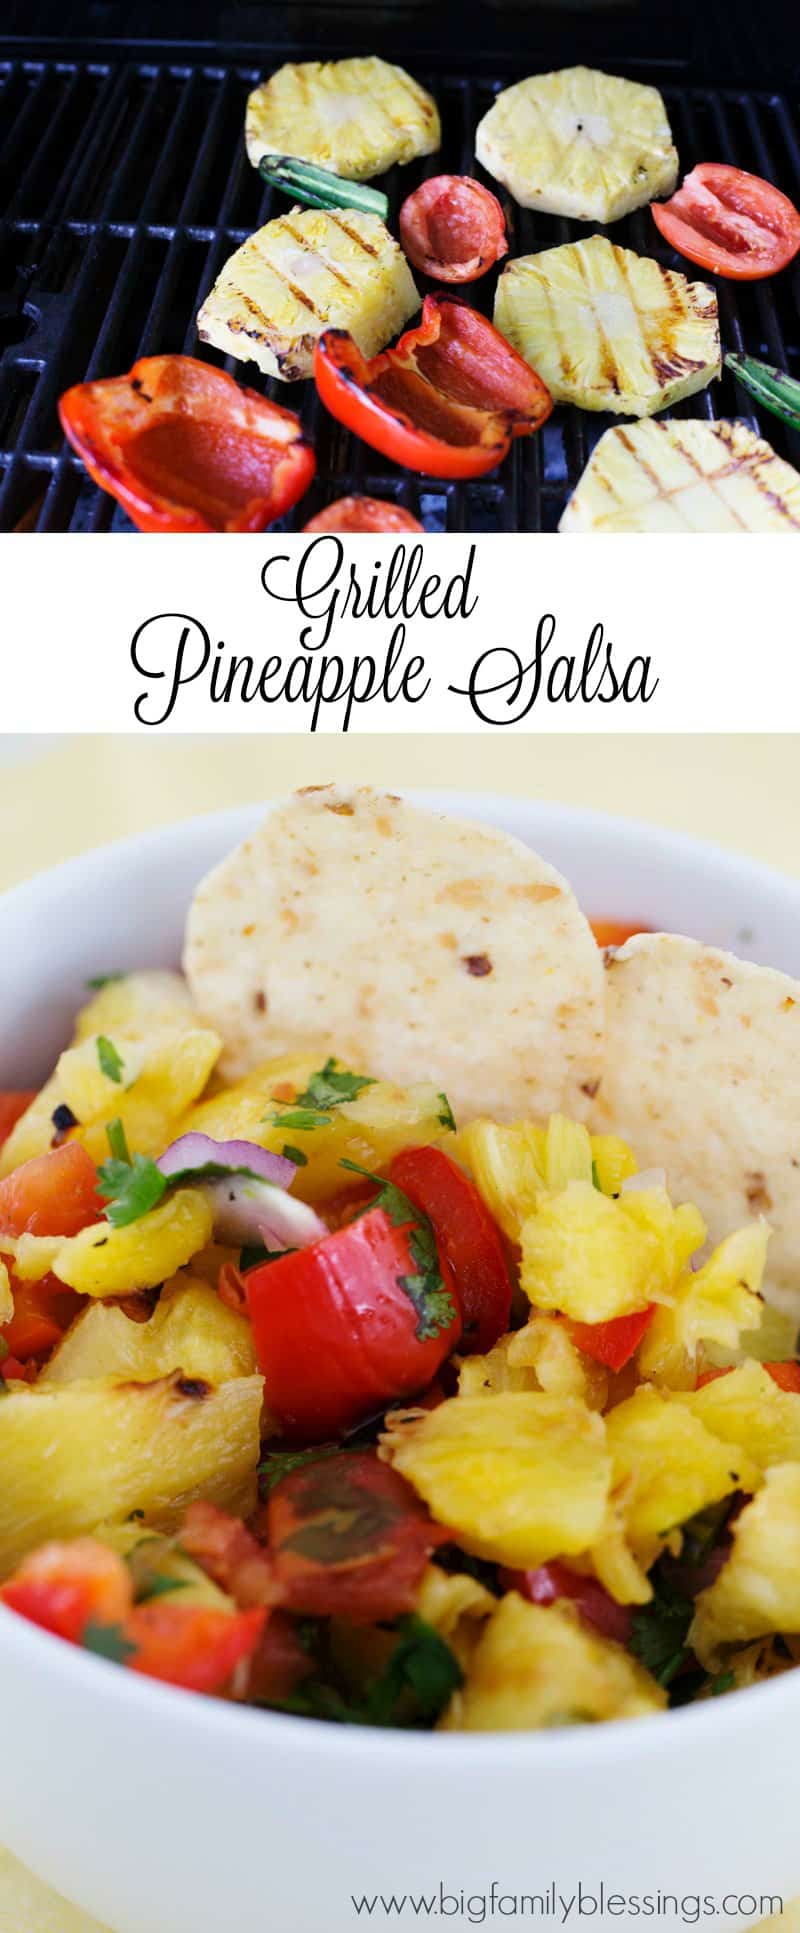 Grilled Pineapple Salsa - absolutely delicious and so simple to prepare. From grill to the table in less than 30 minutes!